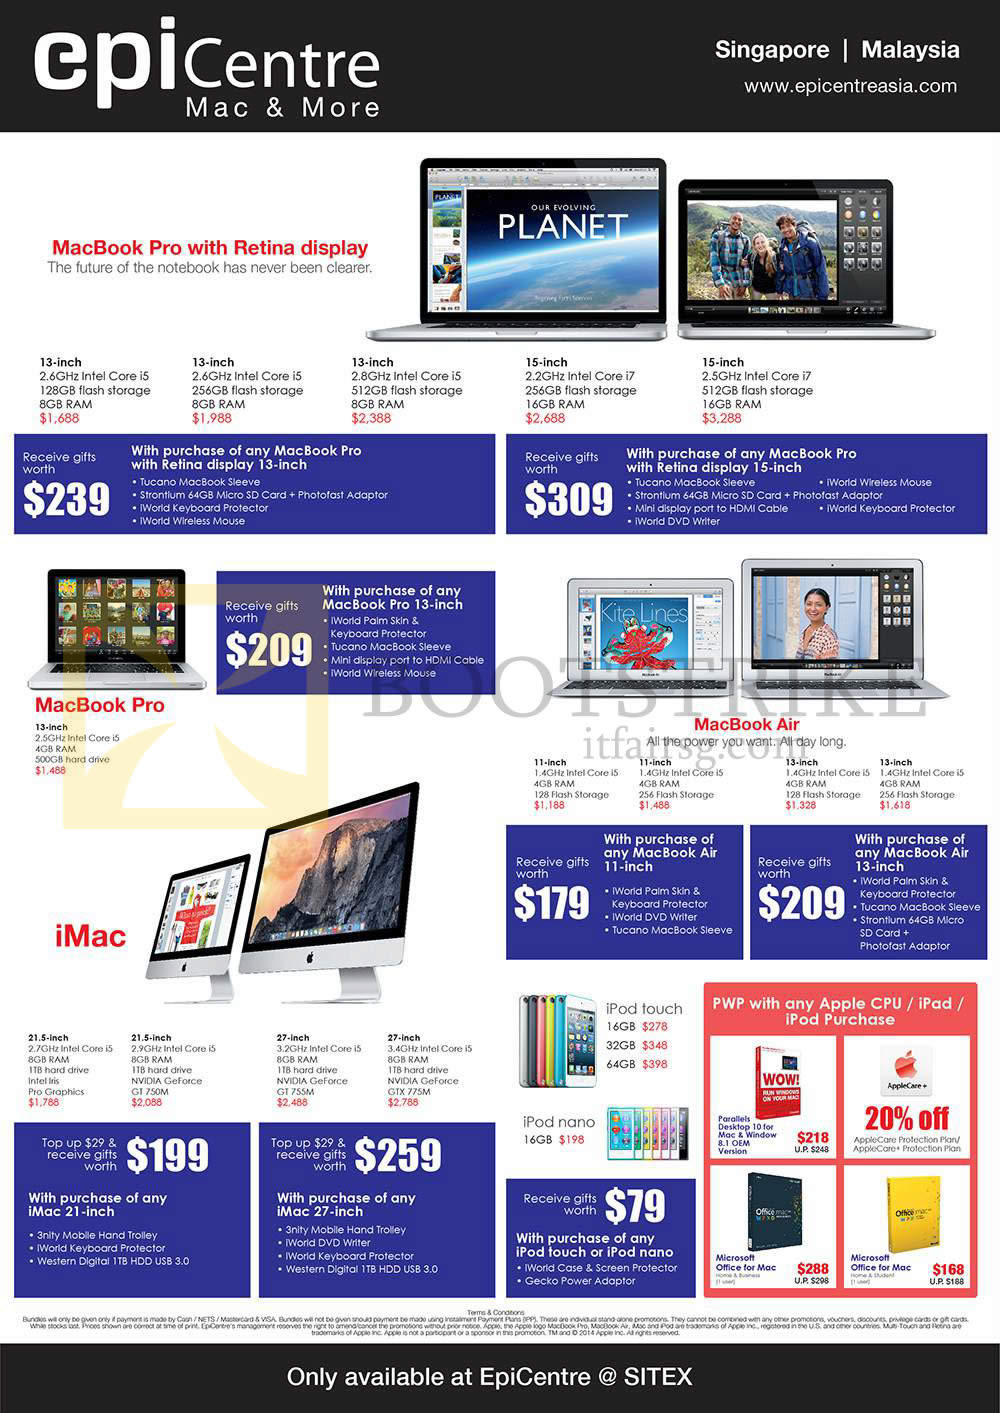 SITEX 2014 price list image brochure of Epicentre Apple MacBook Pro With Retina Display, Macbook Air, MacBook Pro, IMac, IPod Touch, IPod Nano, Purchase With Purchase